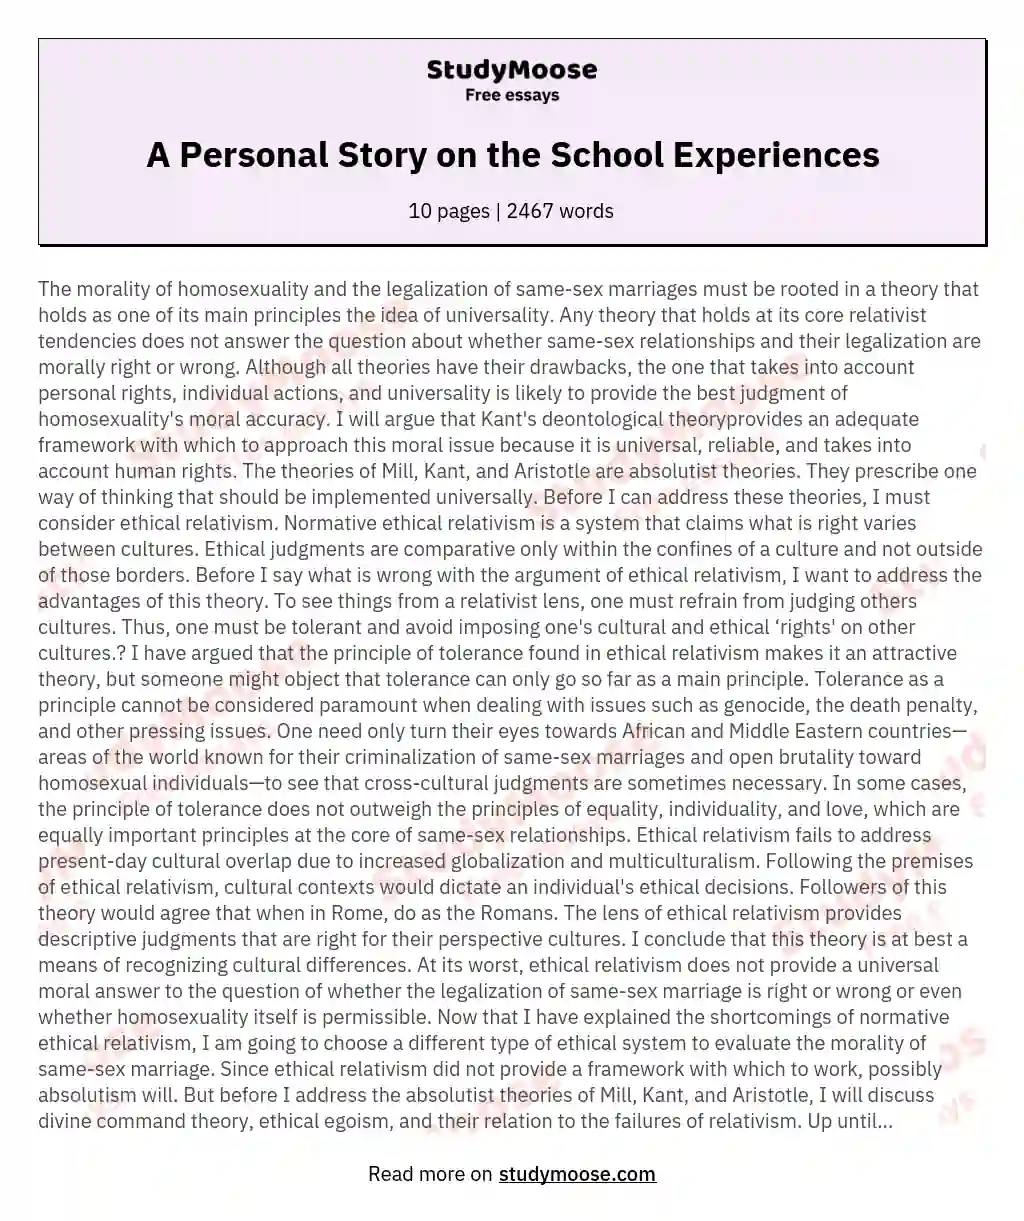 A Personal Story on the School Experiences